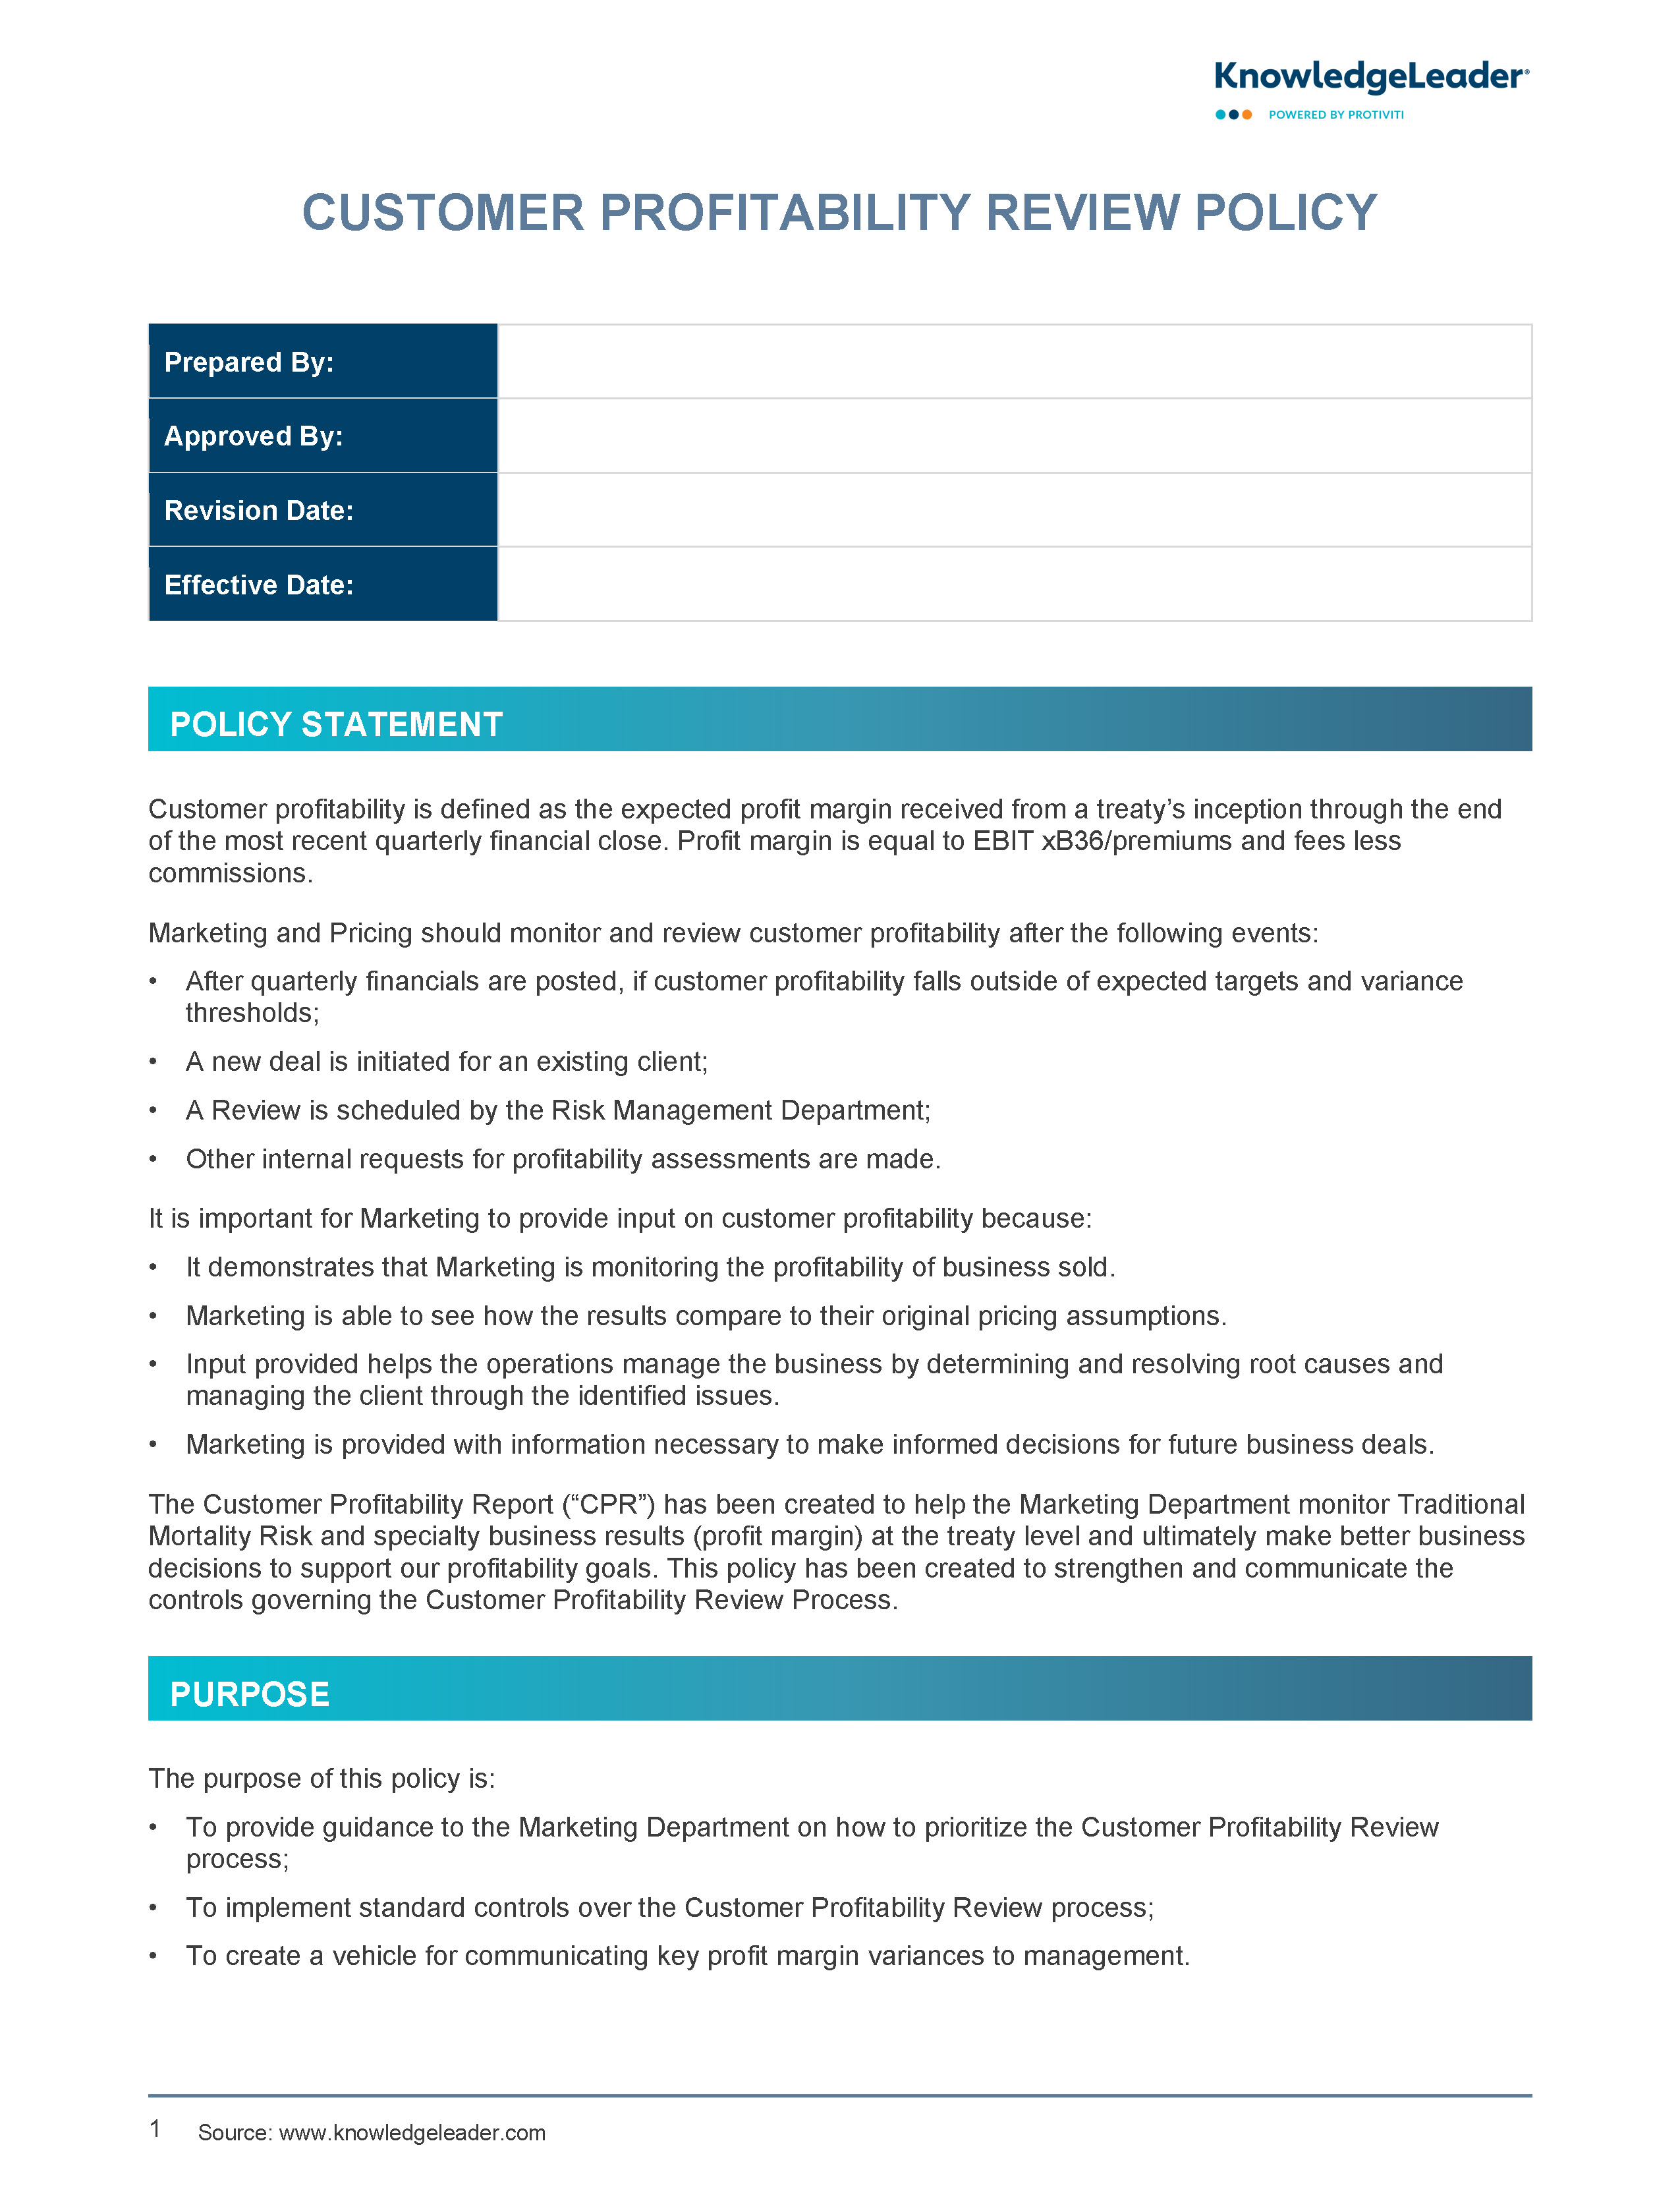 Screenshot of the first page of Customer Profitability Review Policy